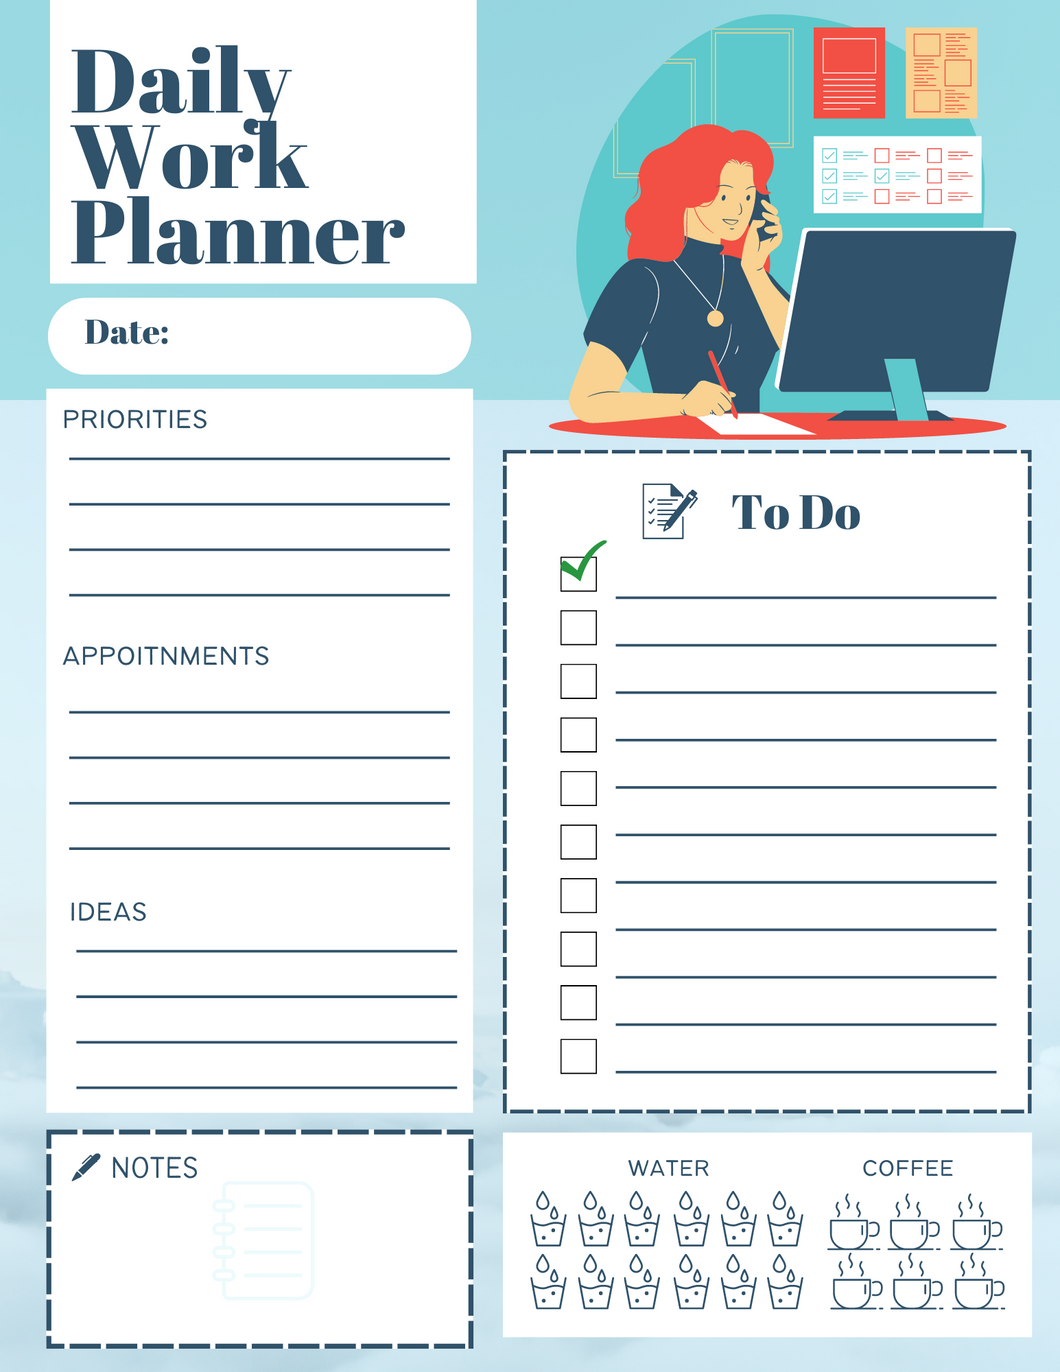 Daily Work Planner